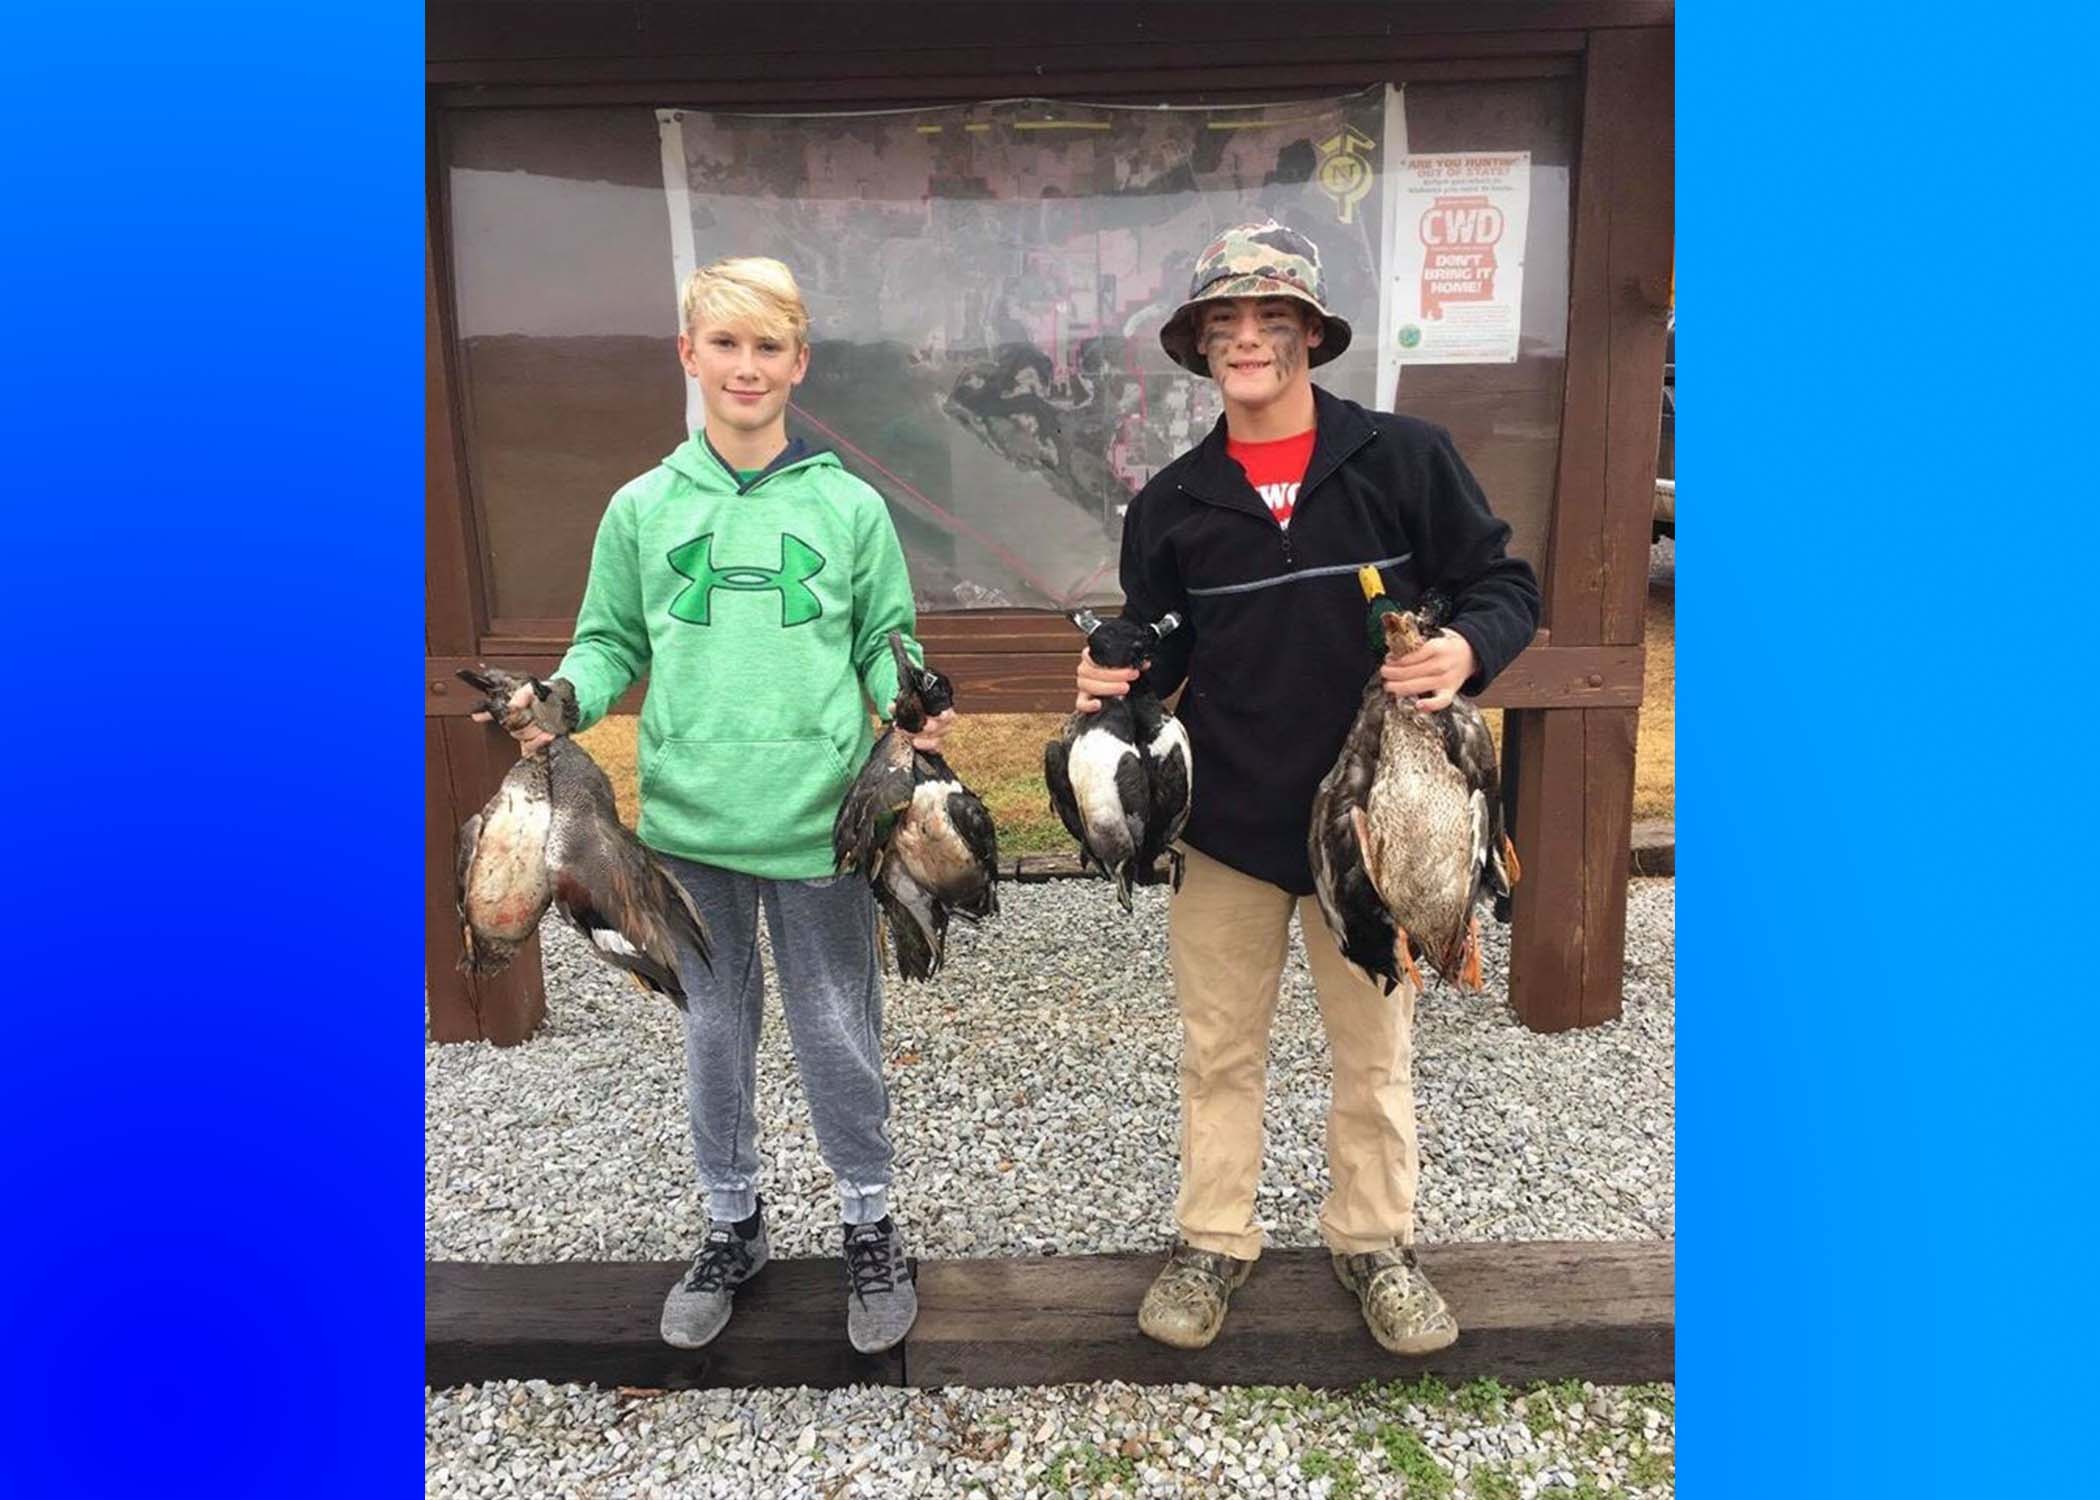 Special waterfowl hunting days for youth, veterans and active military personnel